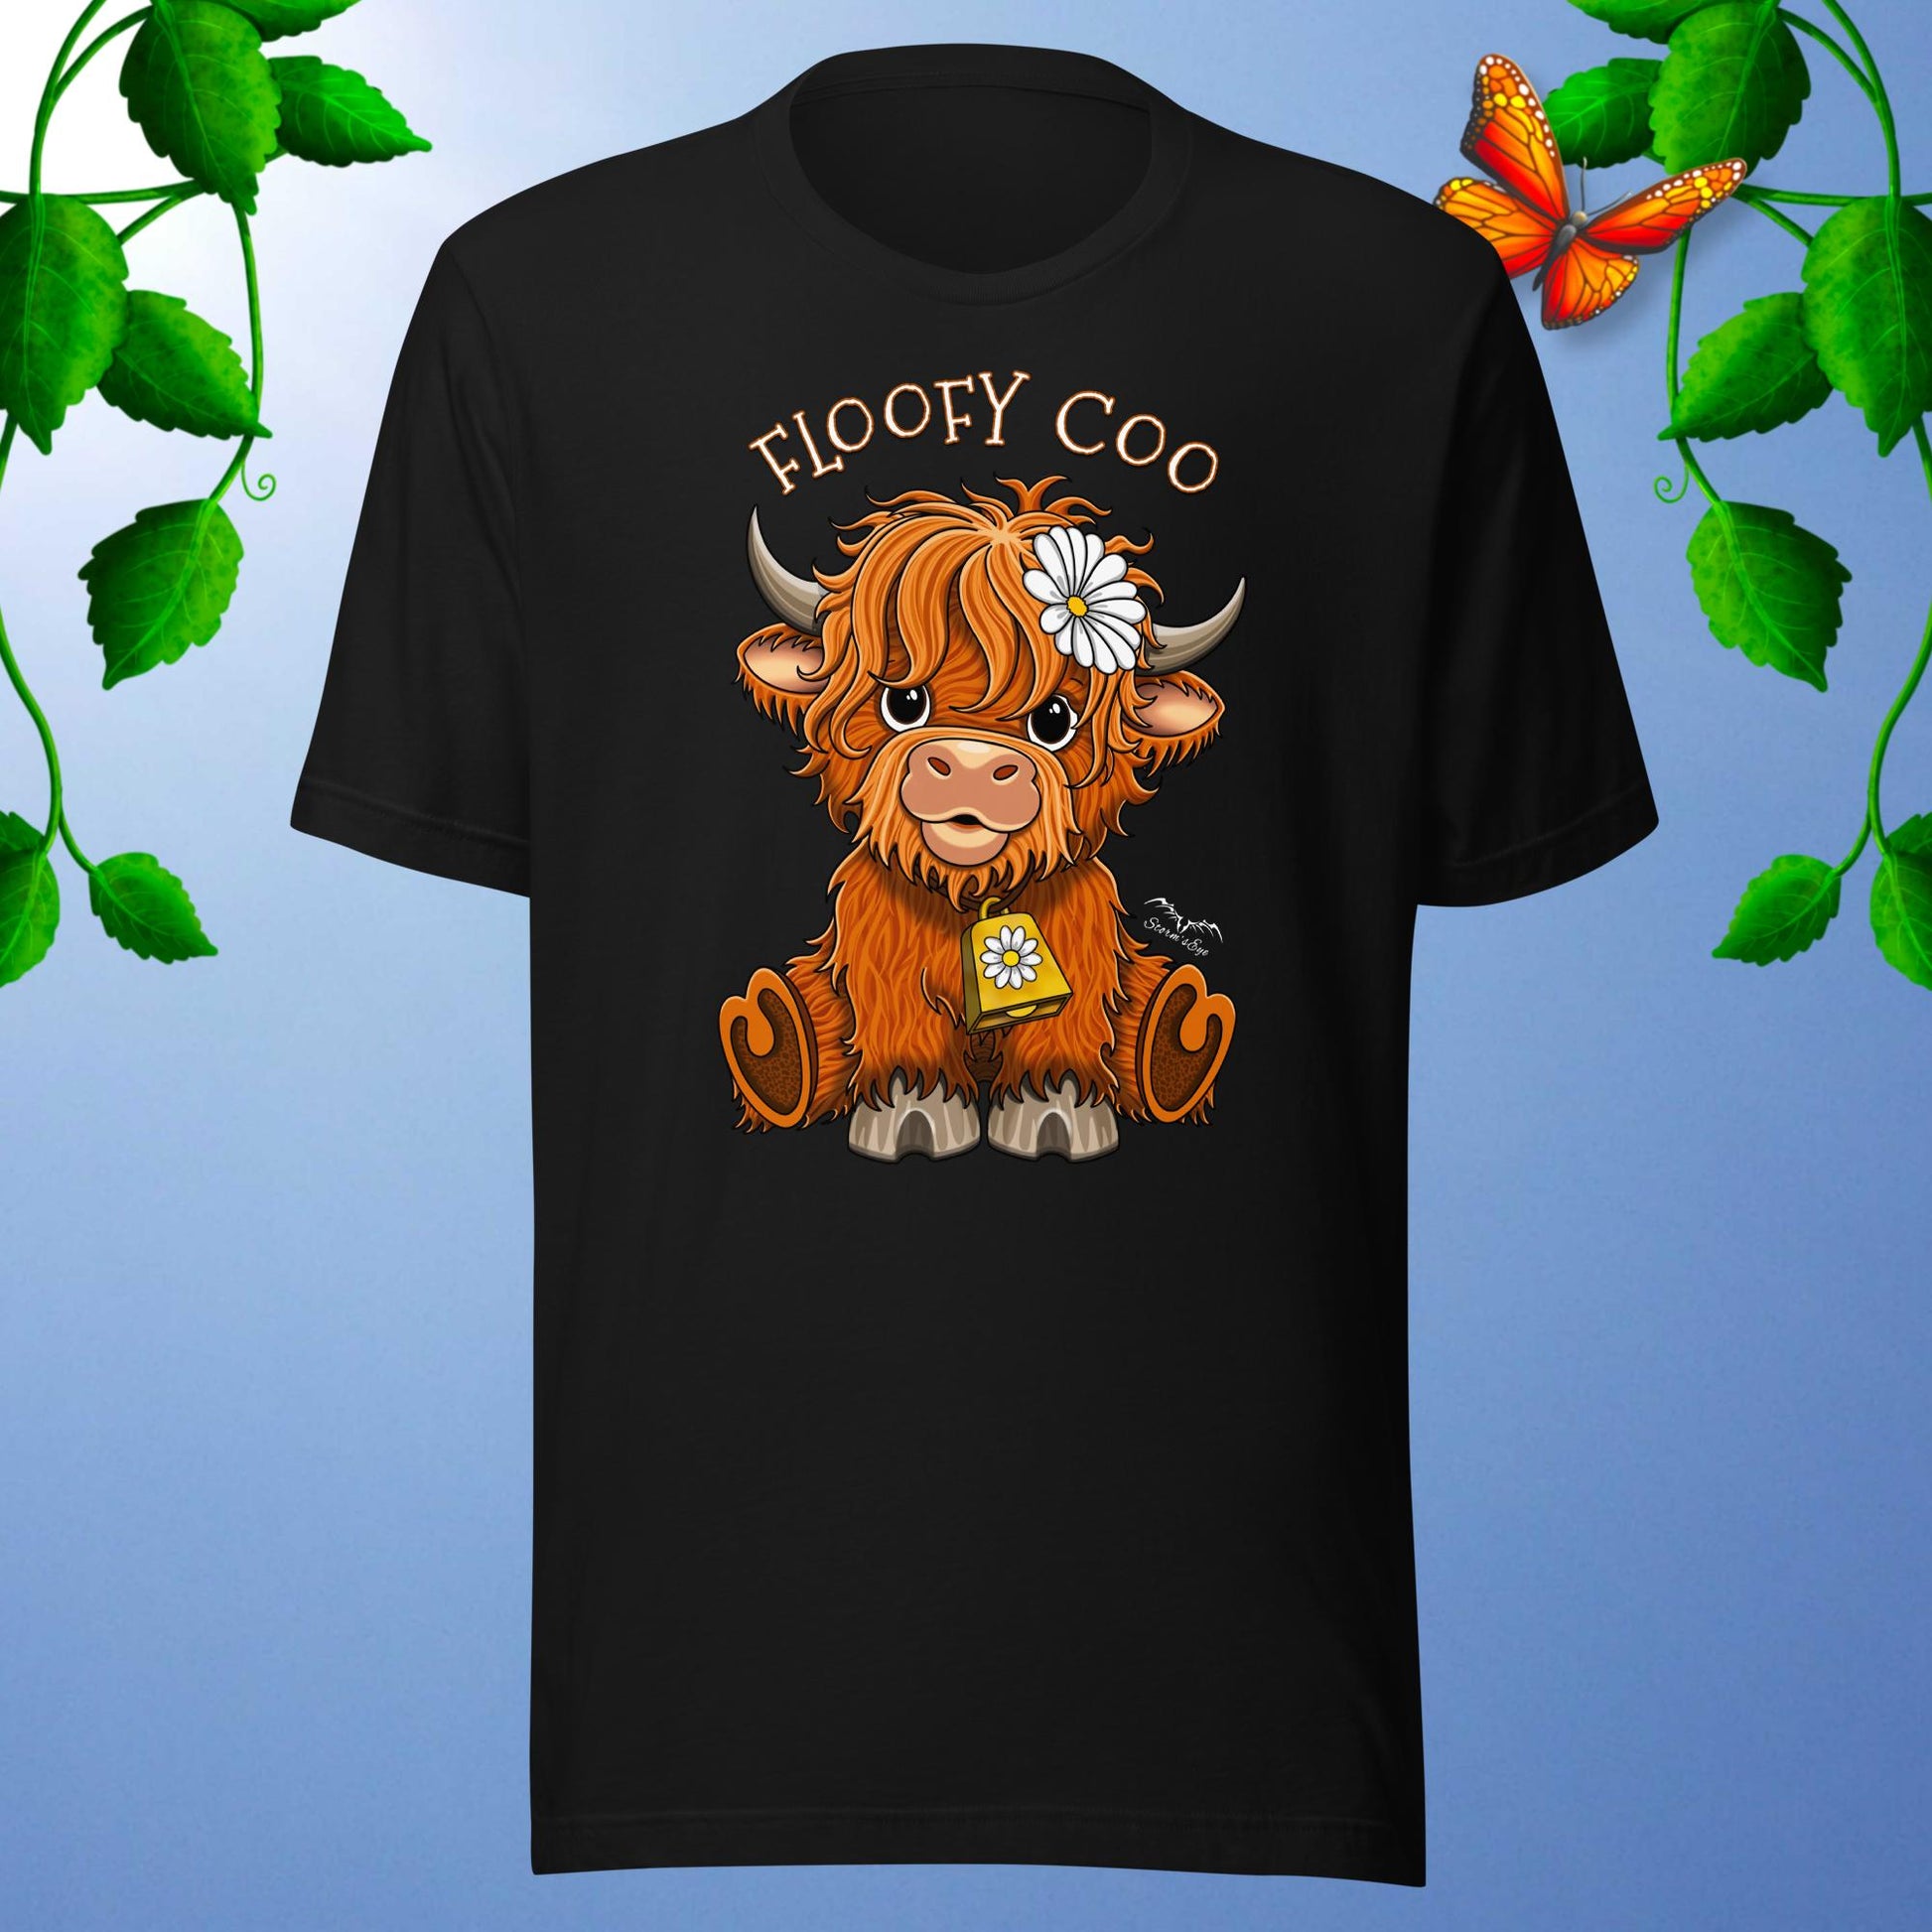 floofy coo highland cow T-shirt, black by Stormseye Design